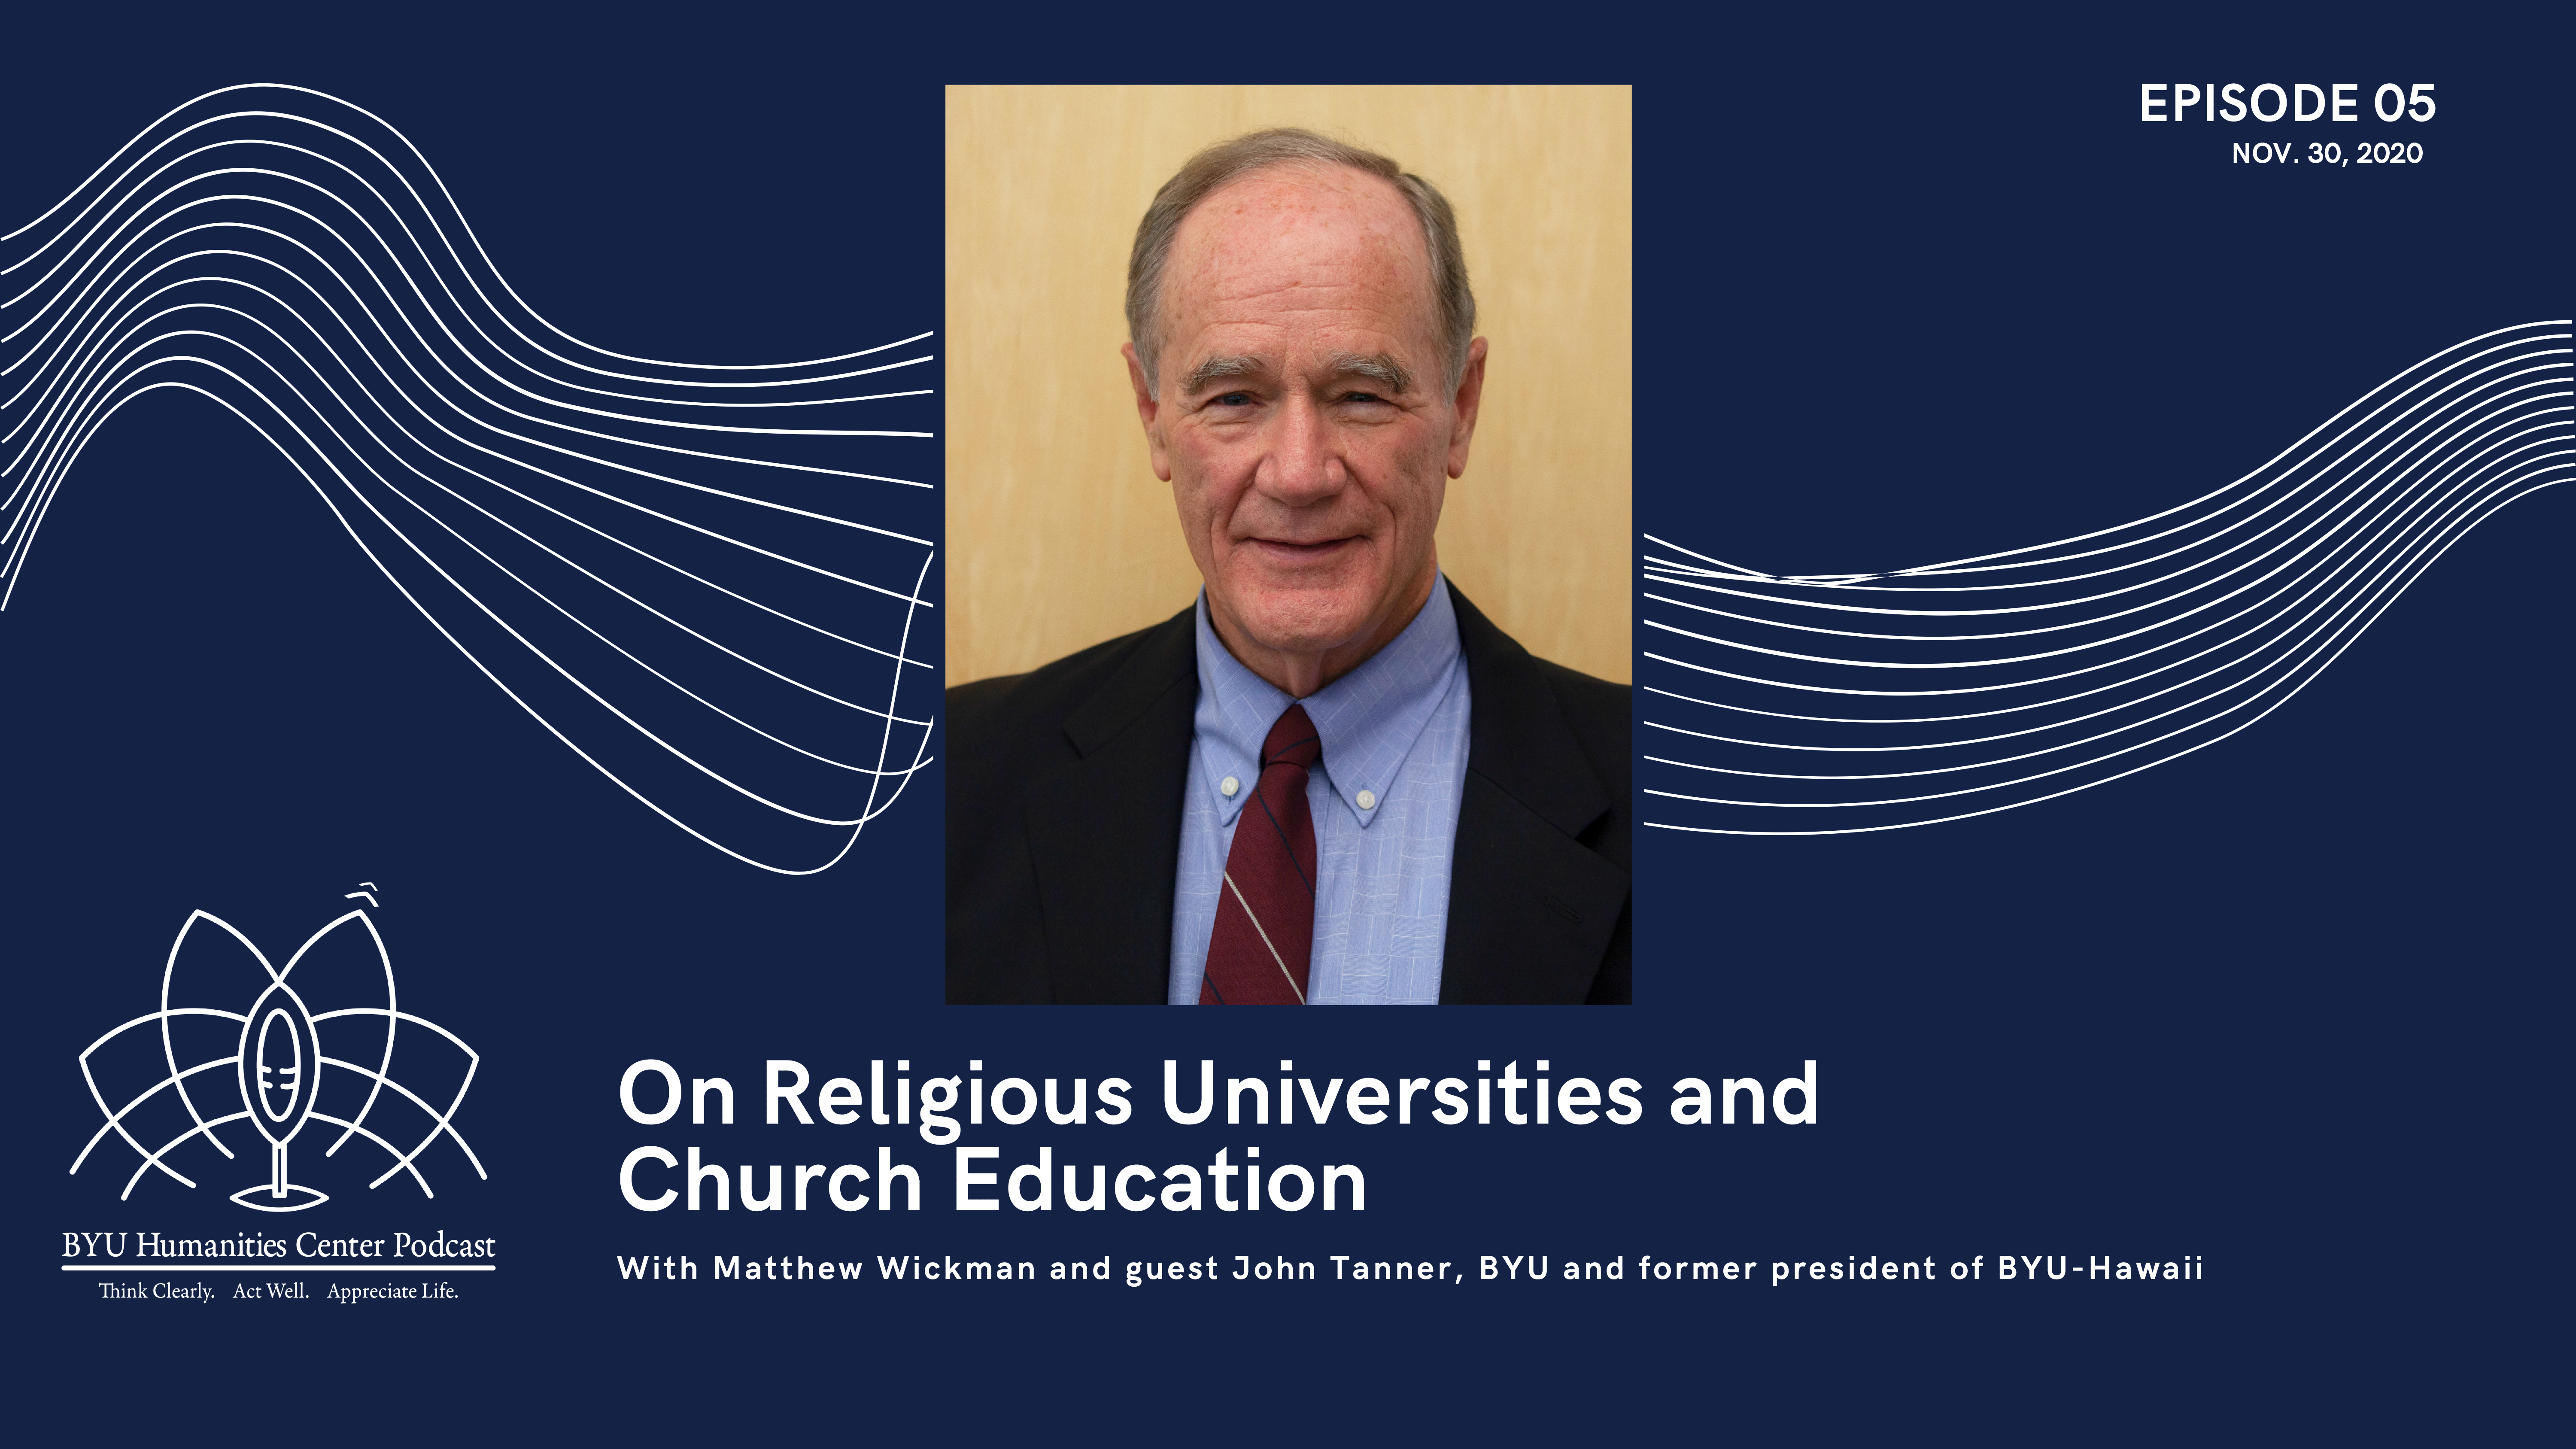 On Religious Universities and Church Education, with guest John Tanner, BYU and former president of BYU-Hawaii